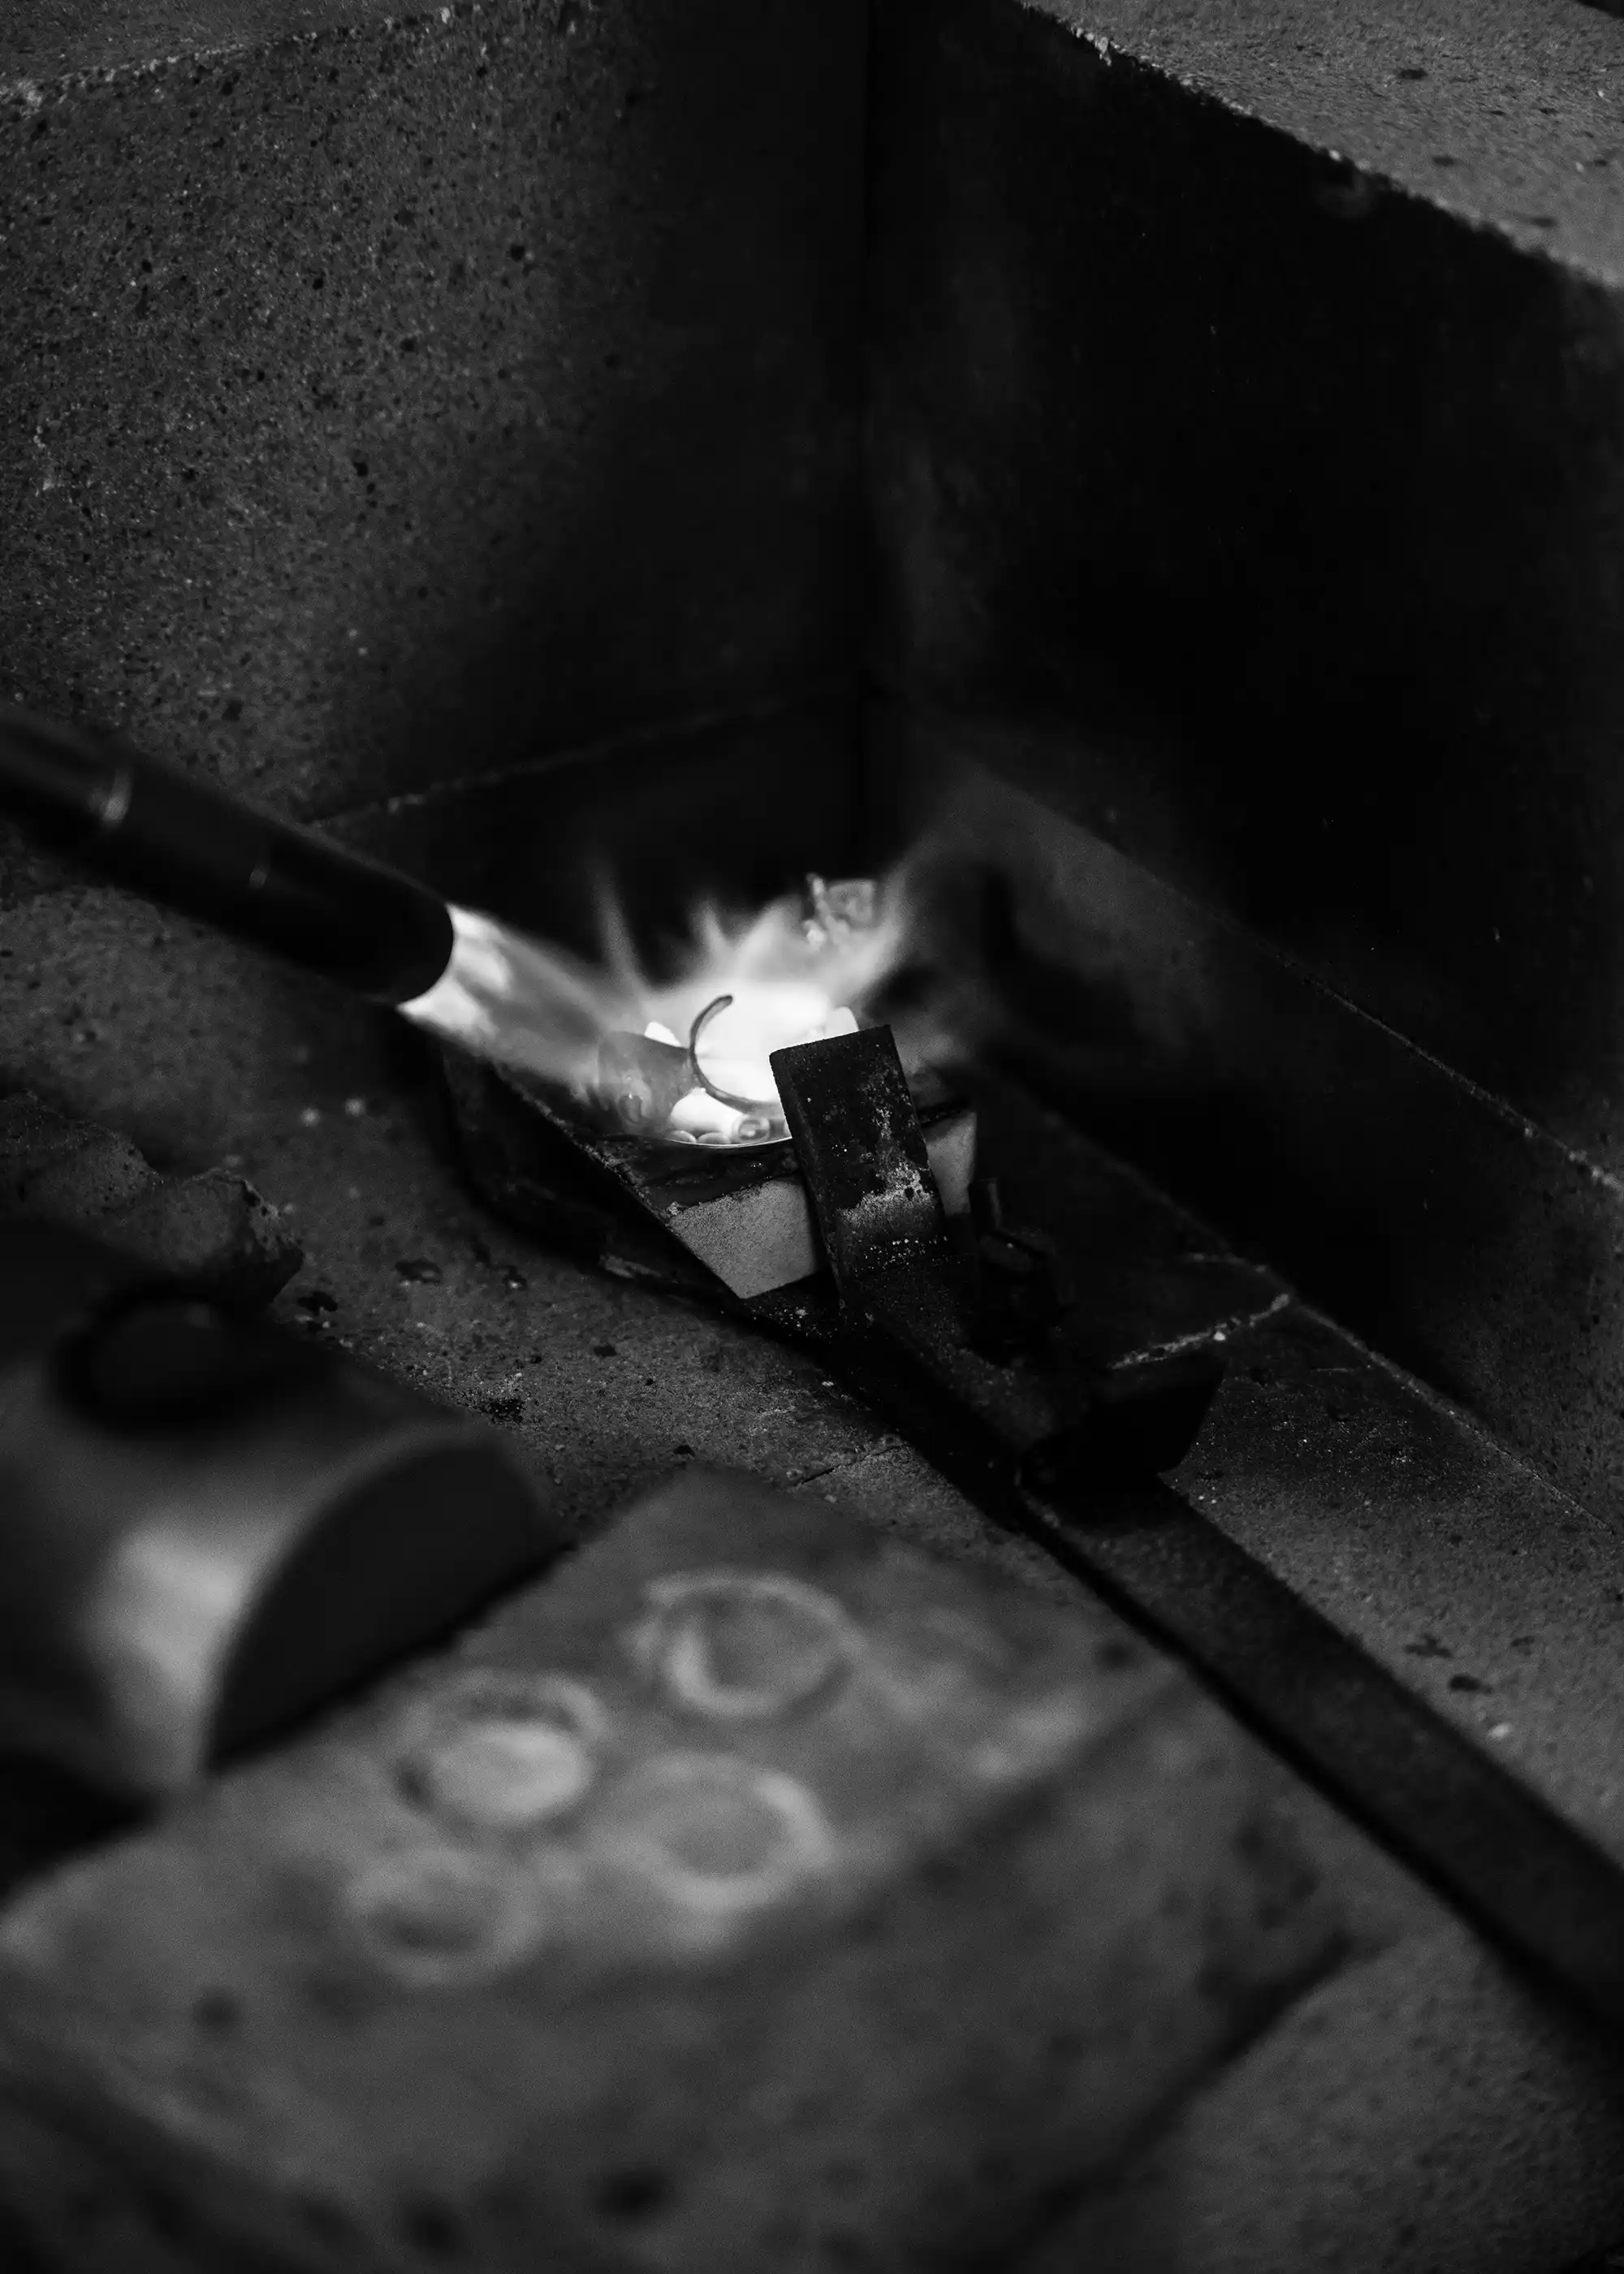 A silver ring in a furnace being melted - Silvawear.